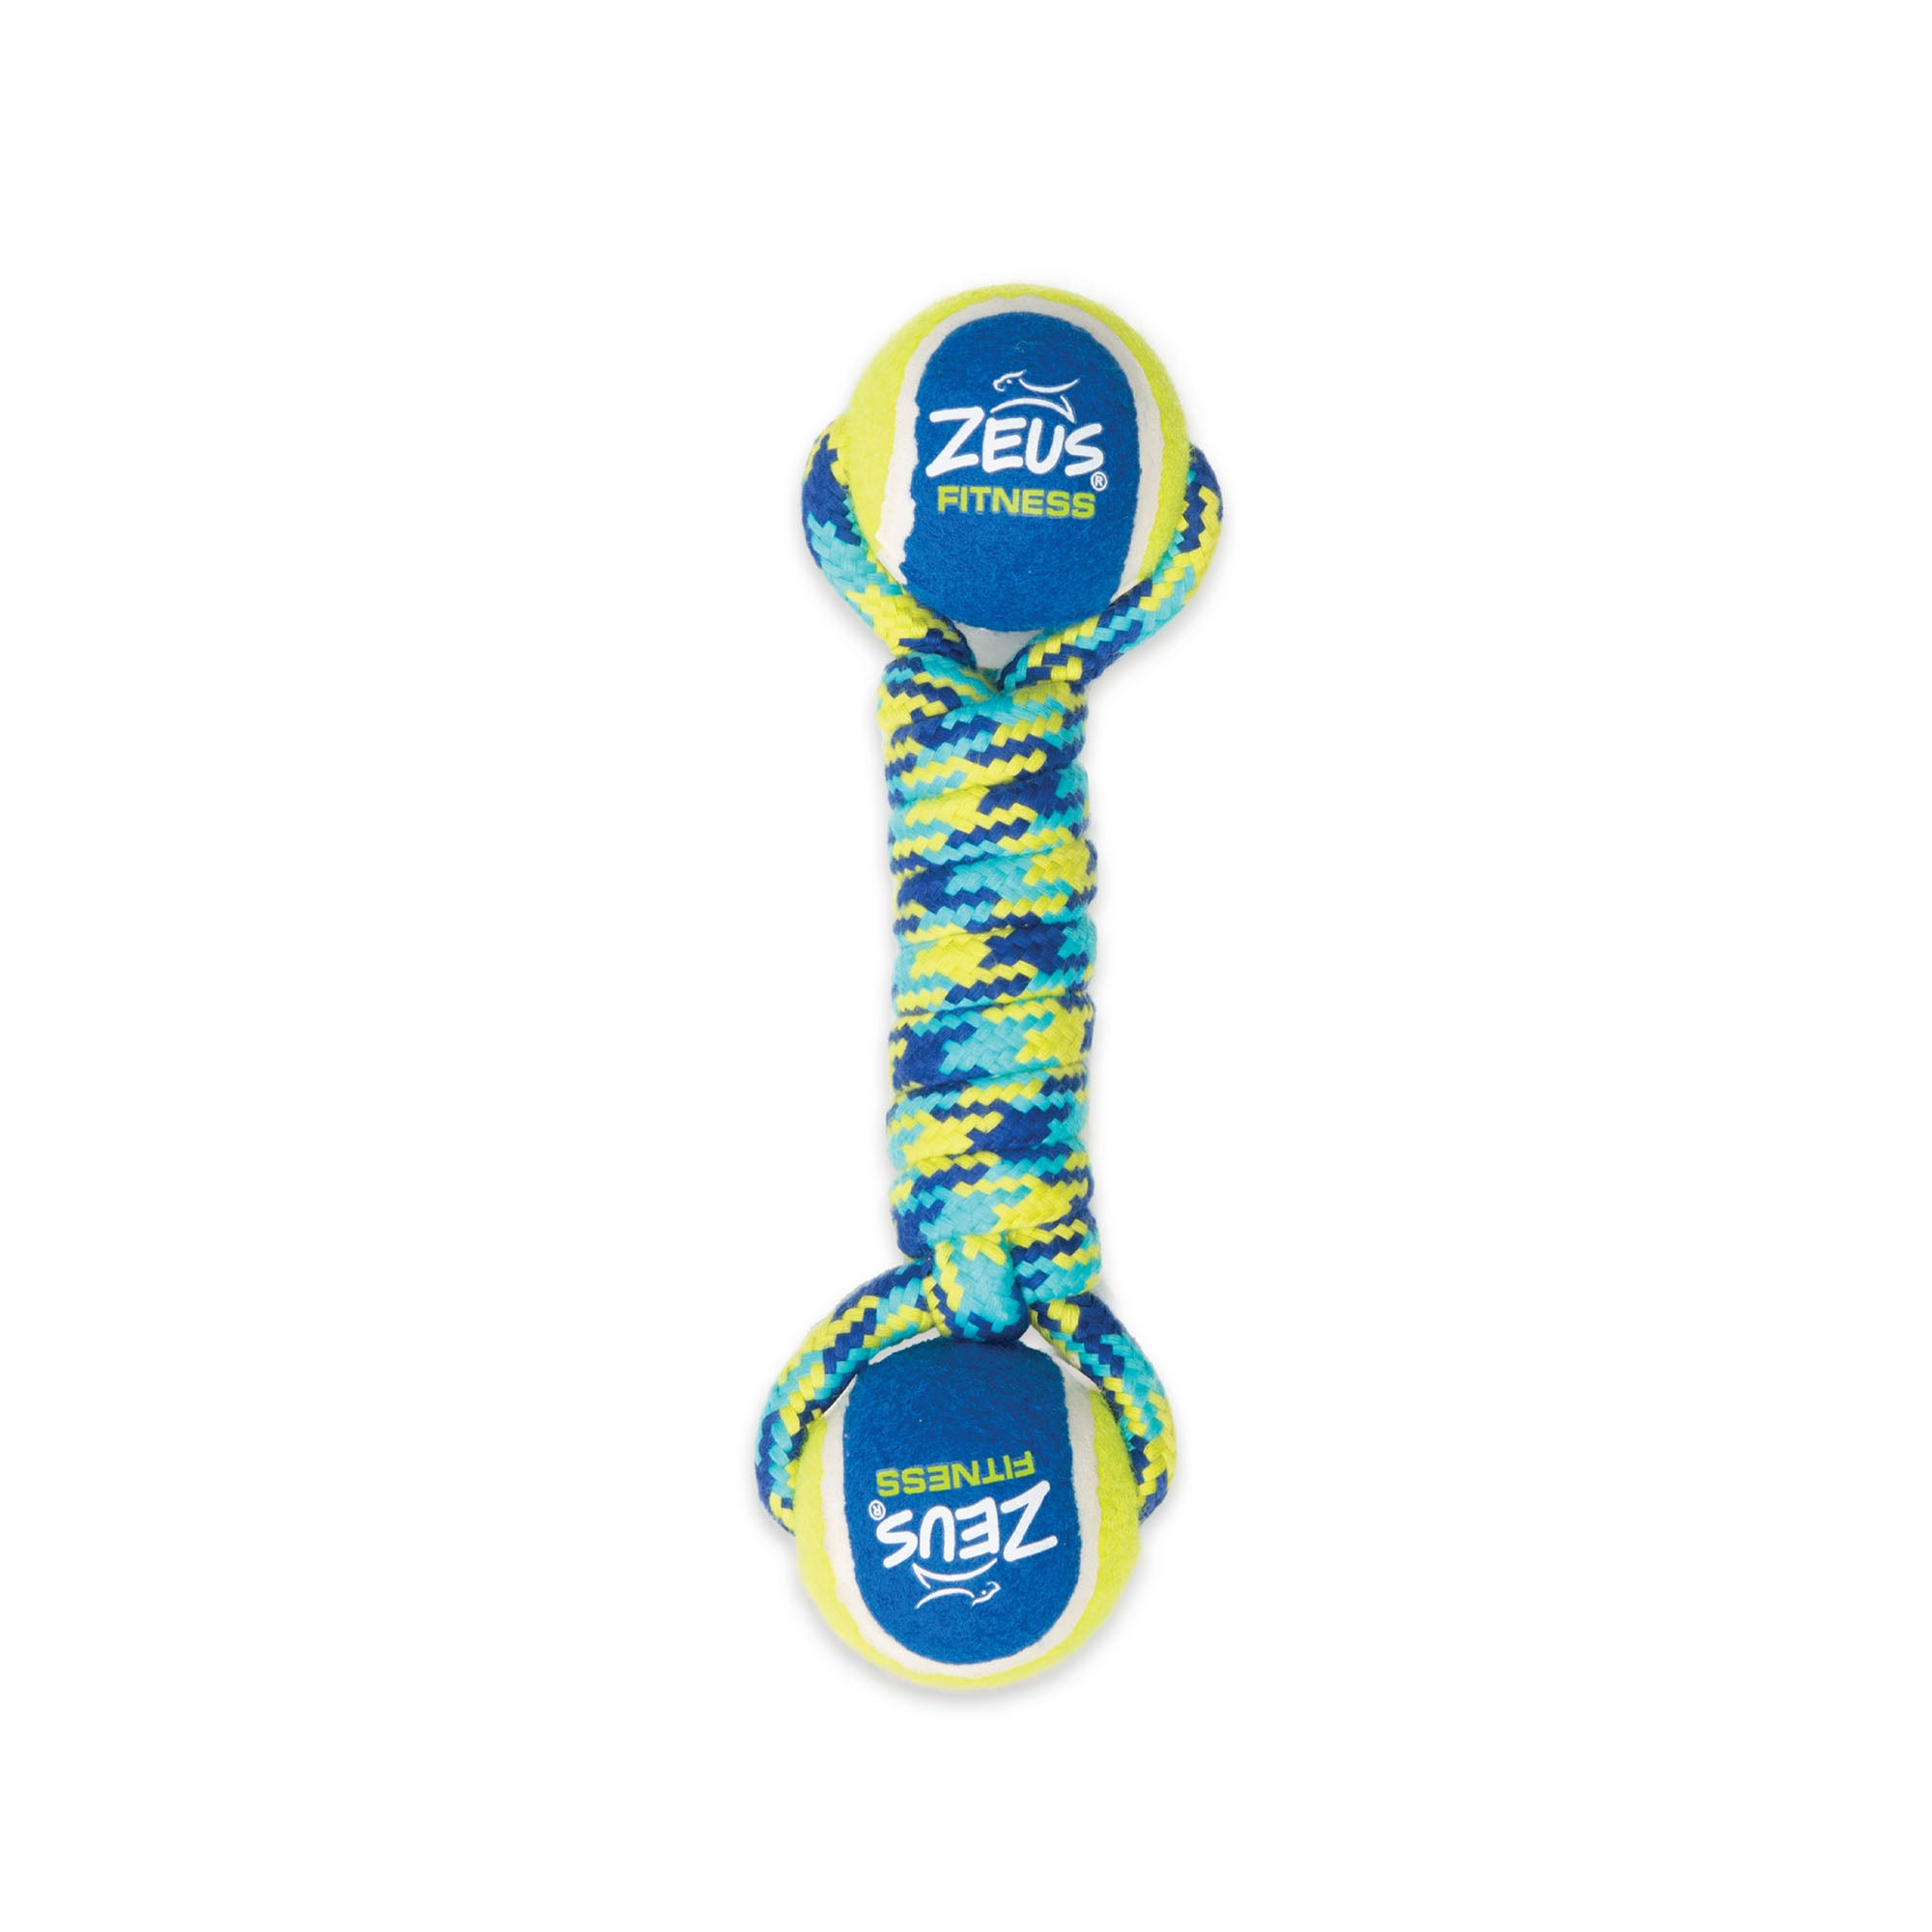 Zeus Fitness Dog Toys Double Tennis Ball Rope Dumbbell with Tennis Ball Medium 6.35cm